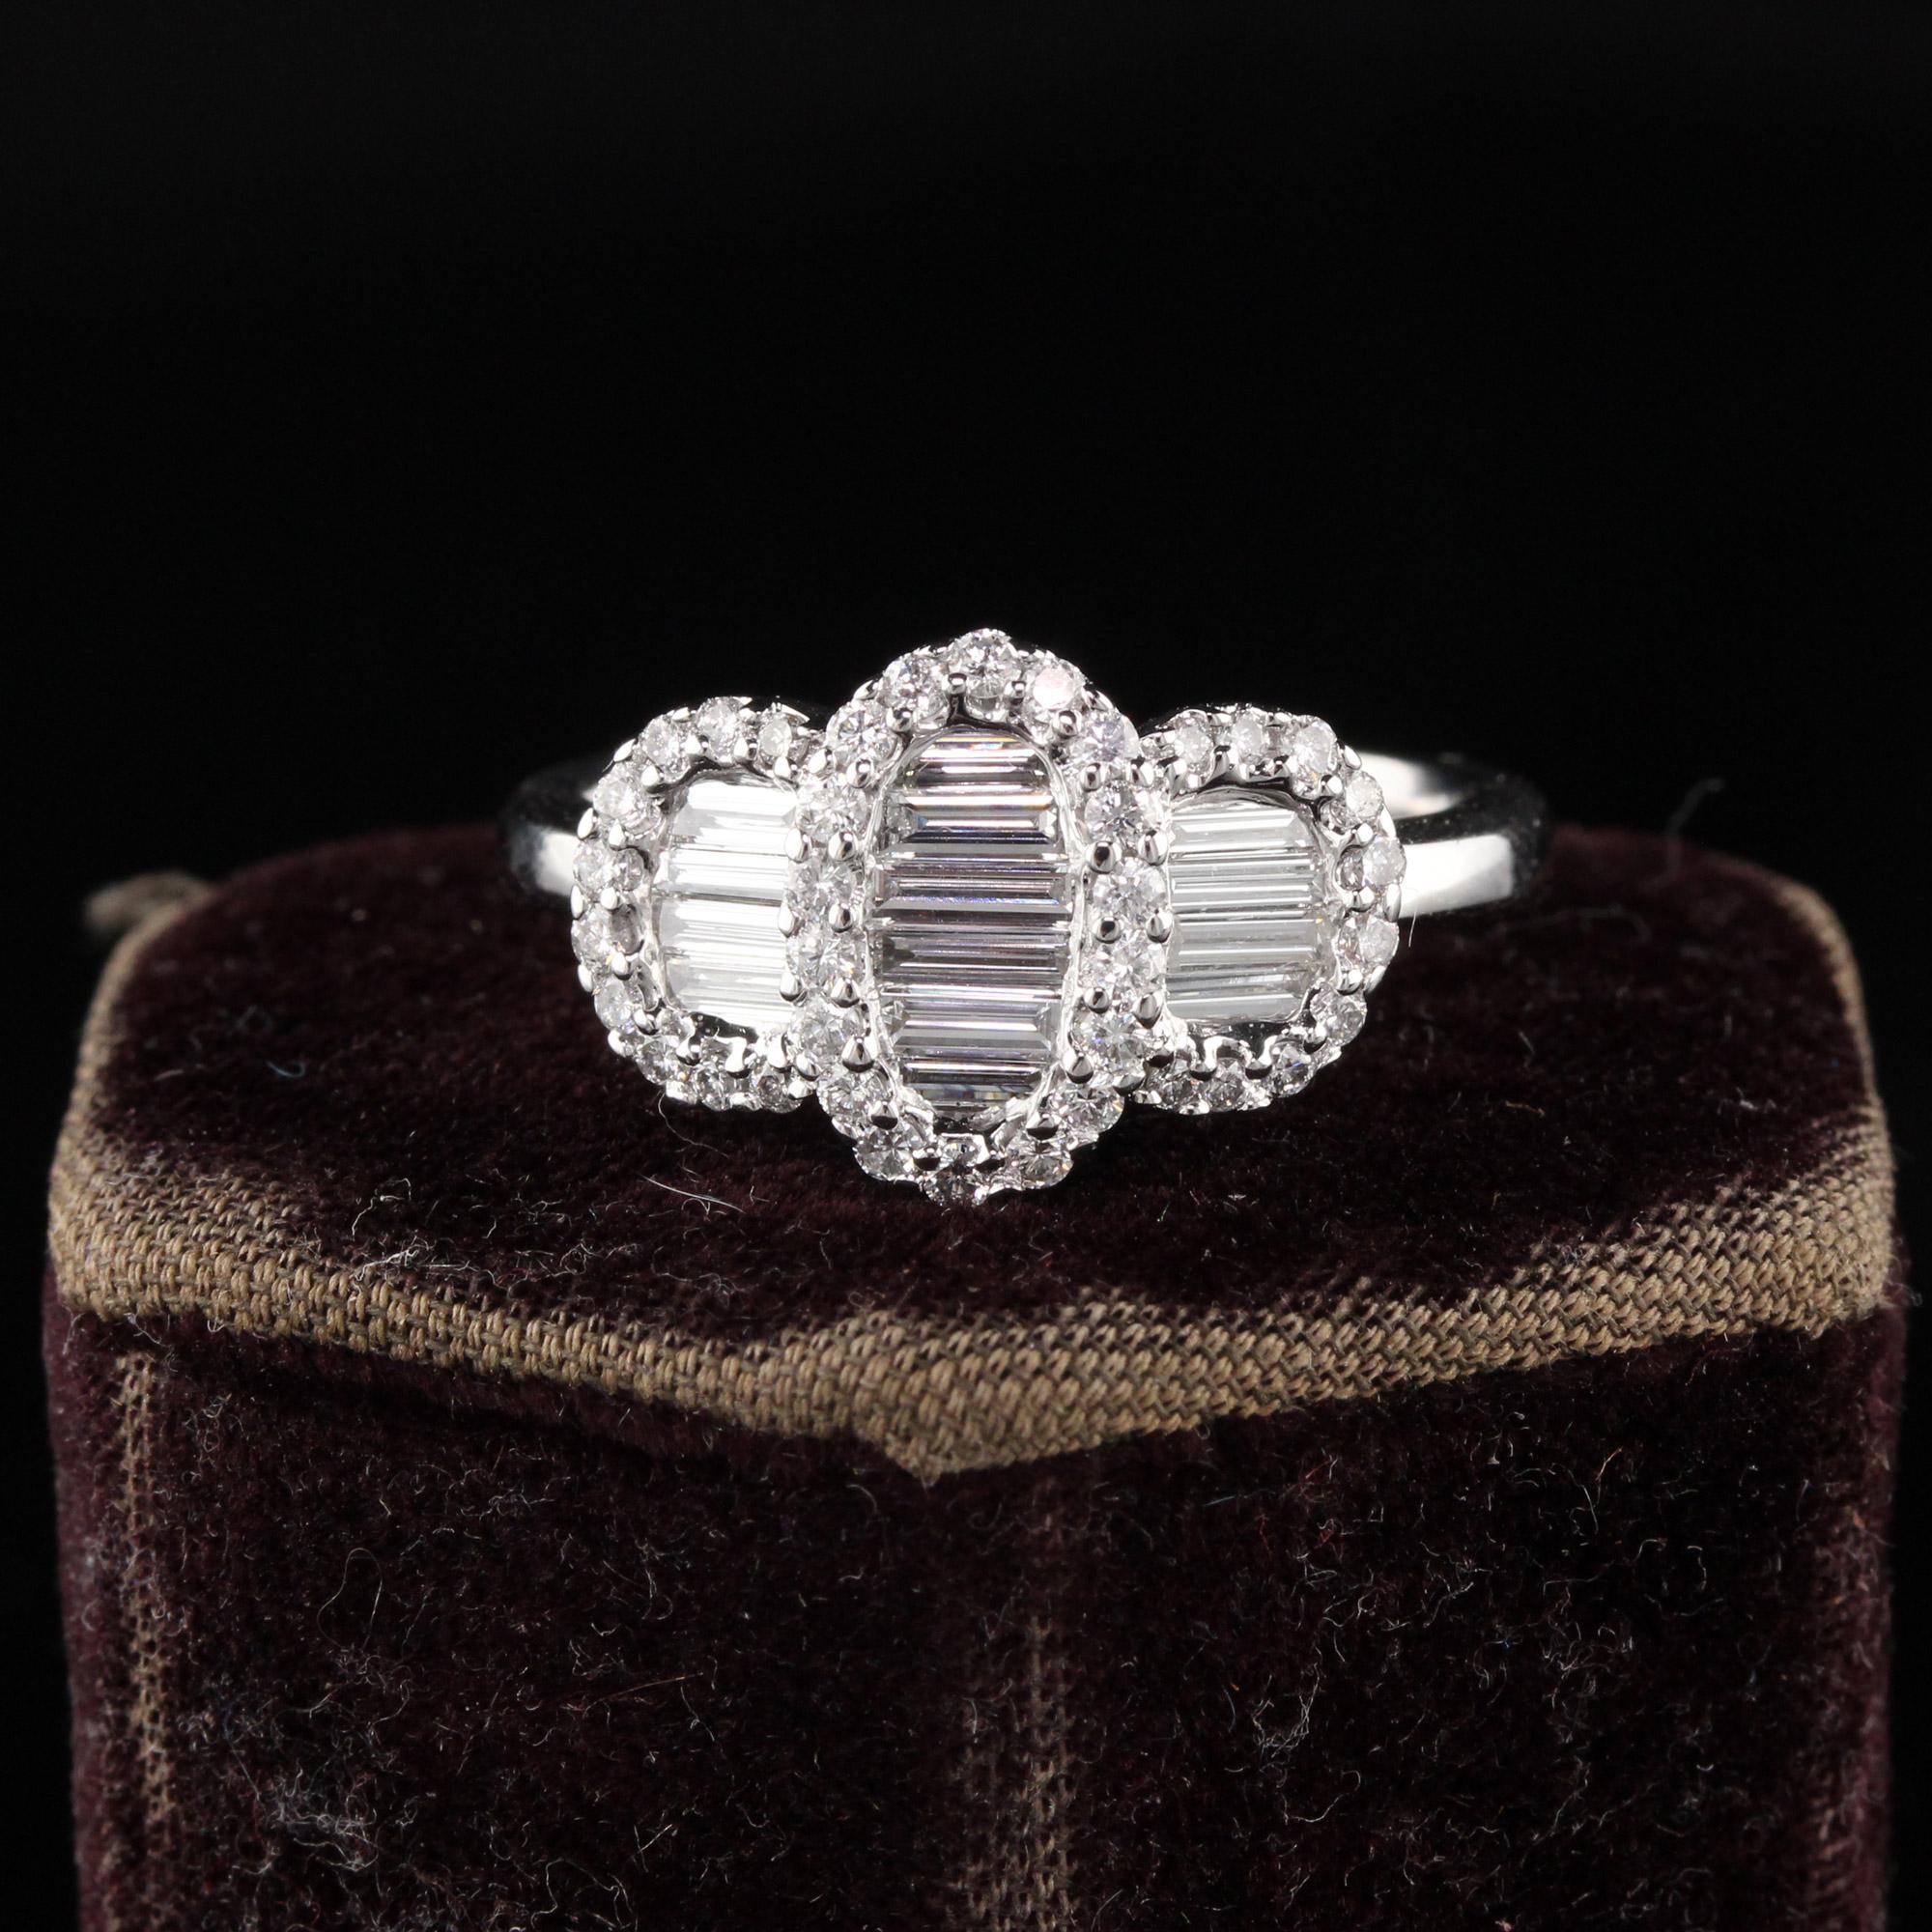 A gorgeous Estate Vintage 14K White Gold Diamond Baguette Cluster 3 Stone Ring. This beauty was made in the 1990s and has a gorgeous and big looks. All the baguette stones were individually cut for this ring. A really beautiful look!

#R0603

Metal: